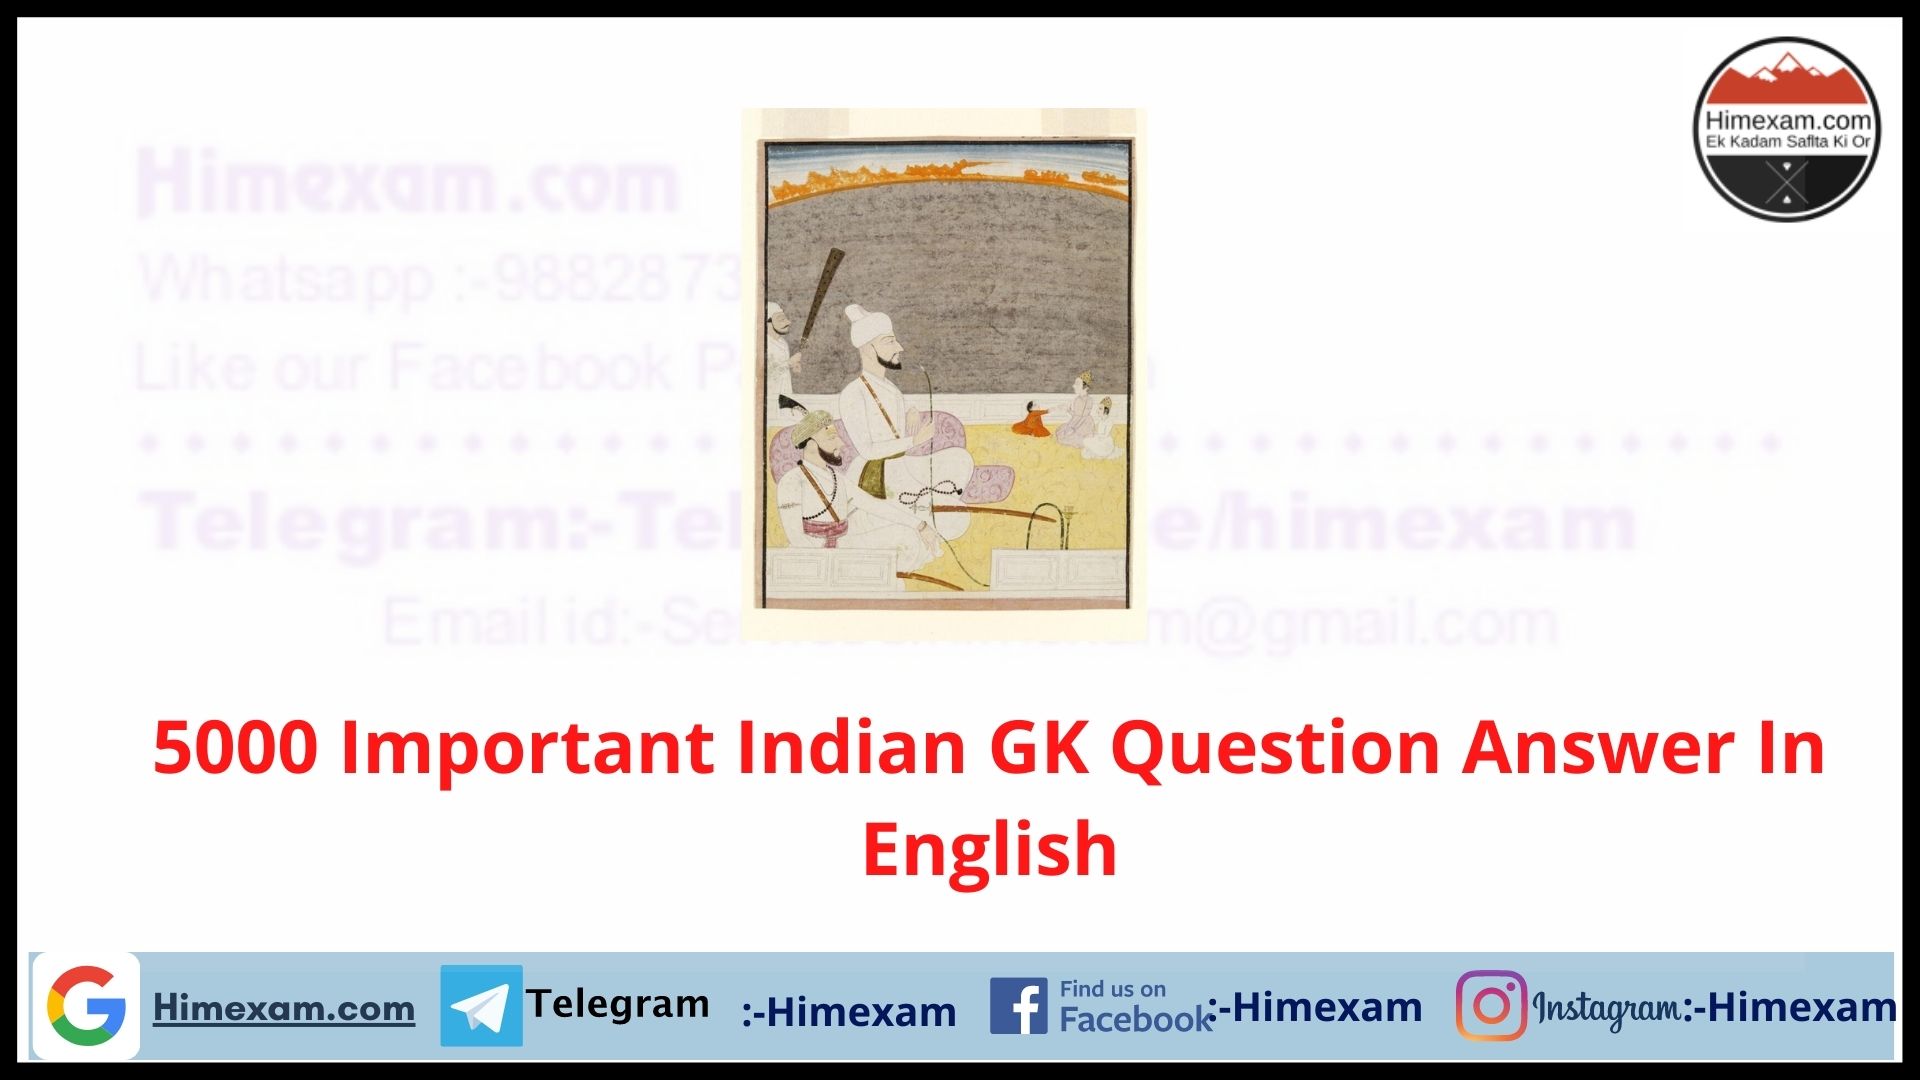 5000 Important Indian GK Question Answer In English